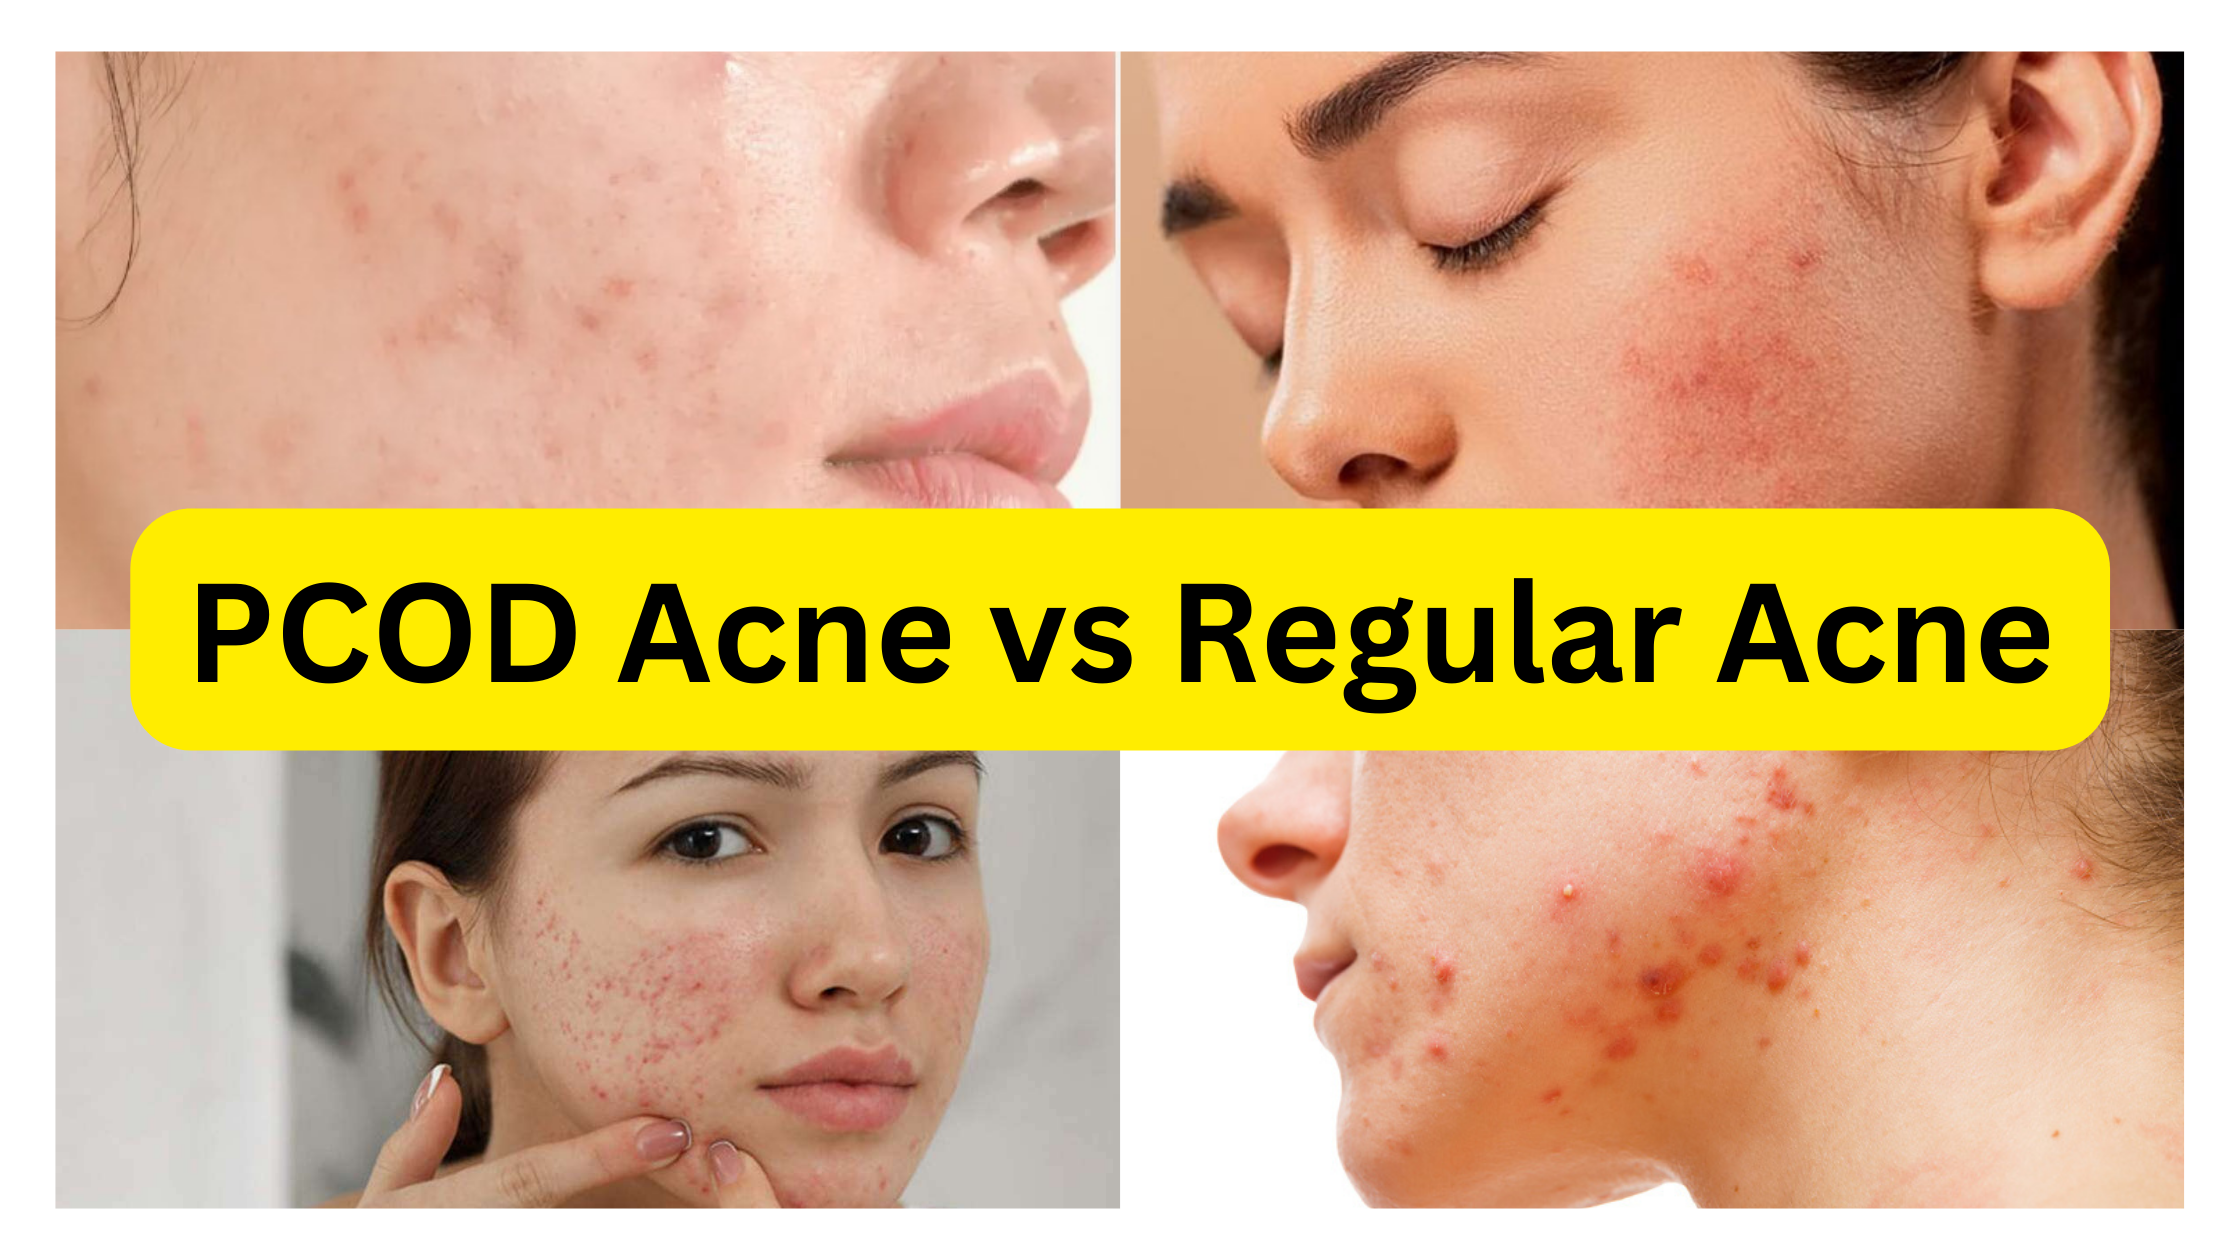 PCOD Acne Vs Regular Acne. Understanding the differences